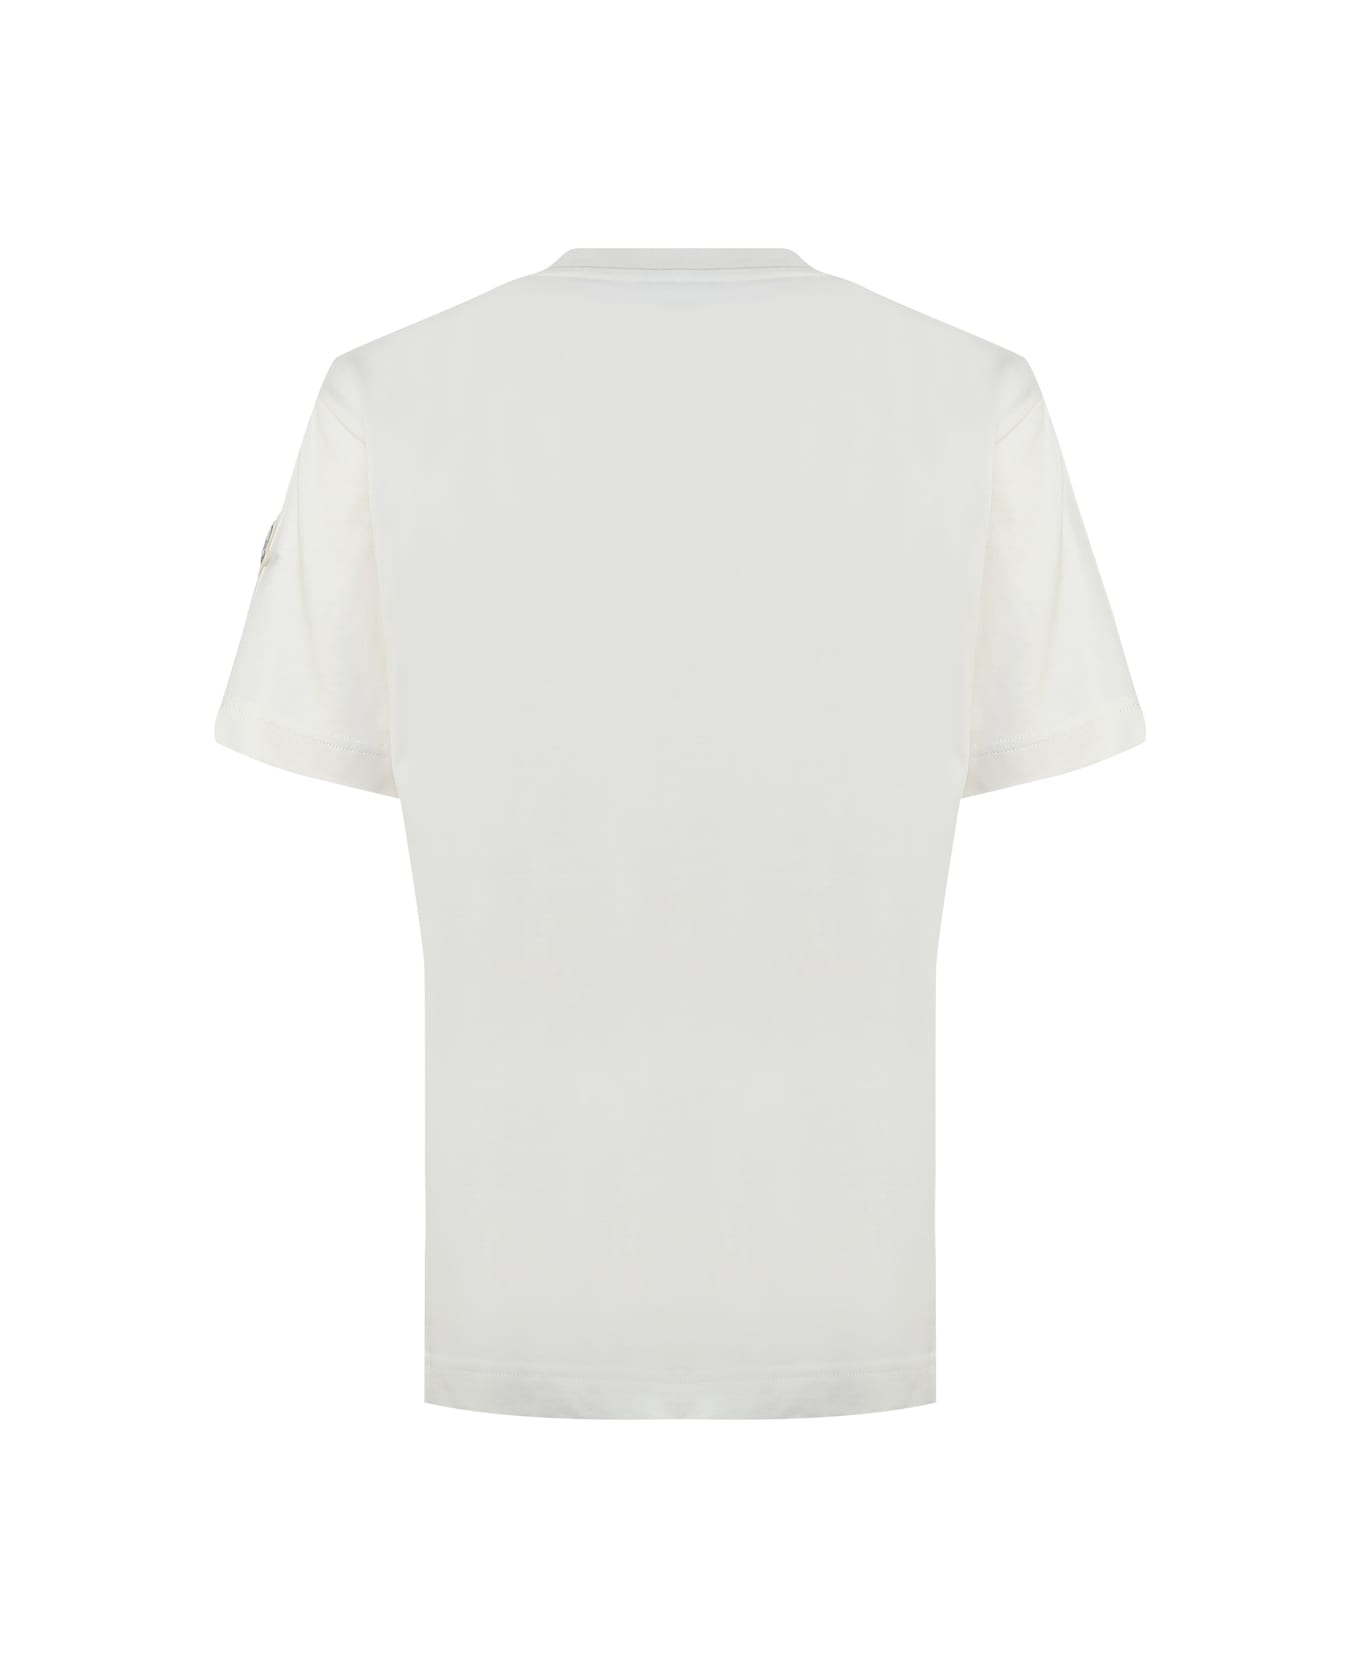 Moncler T-shirt With Sequin Logo - White